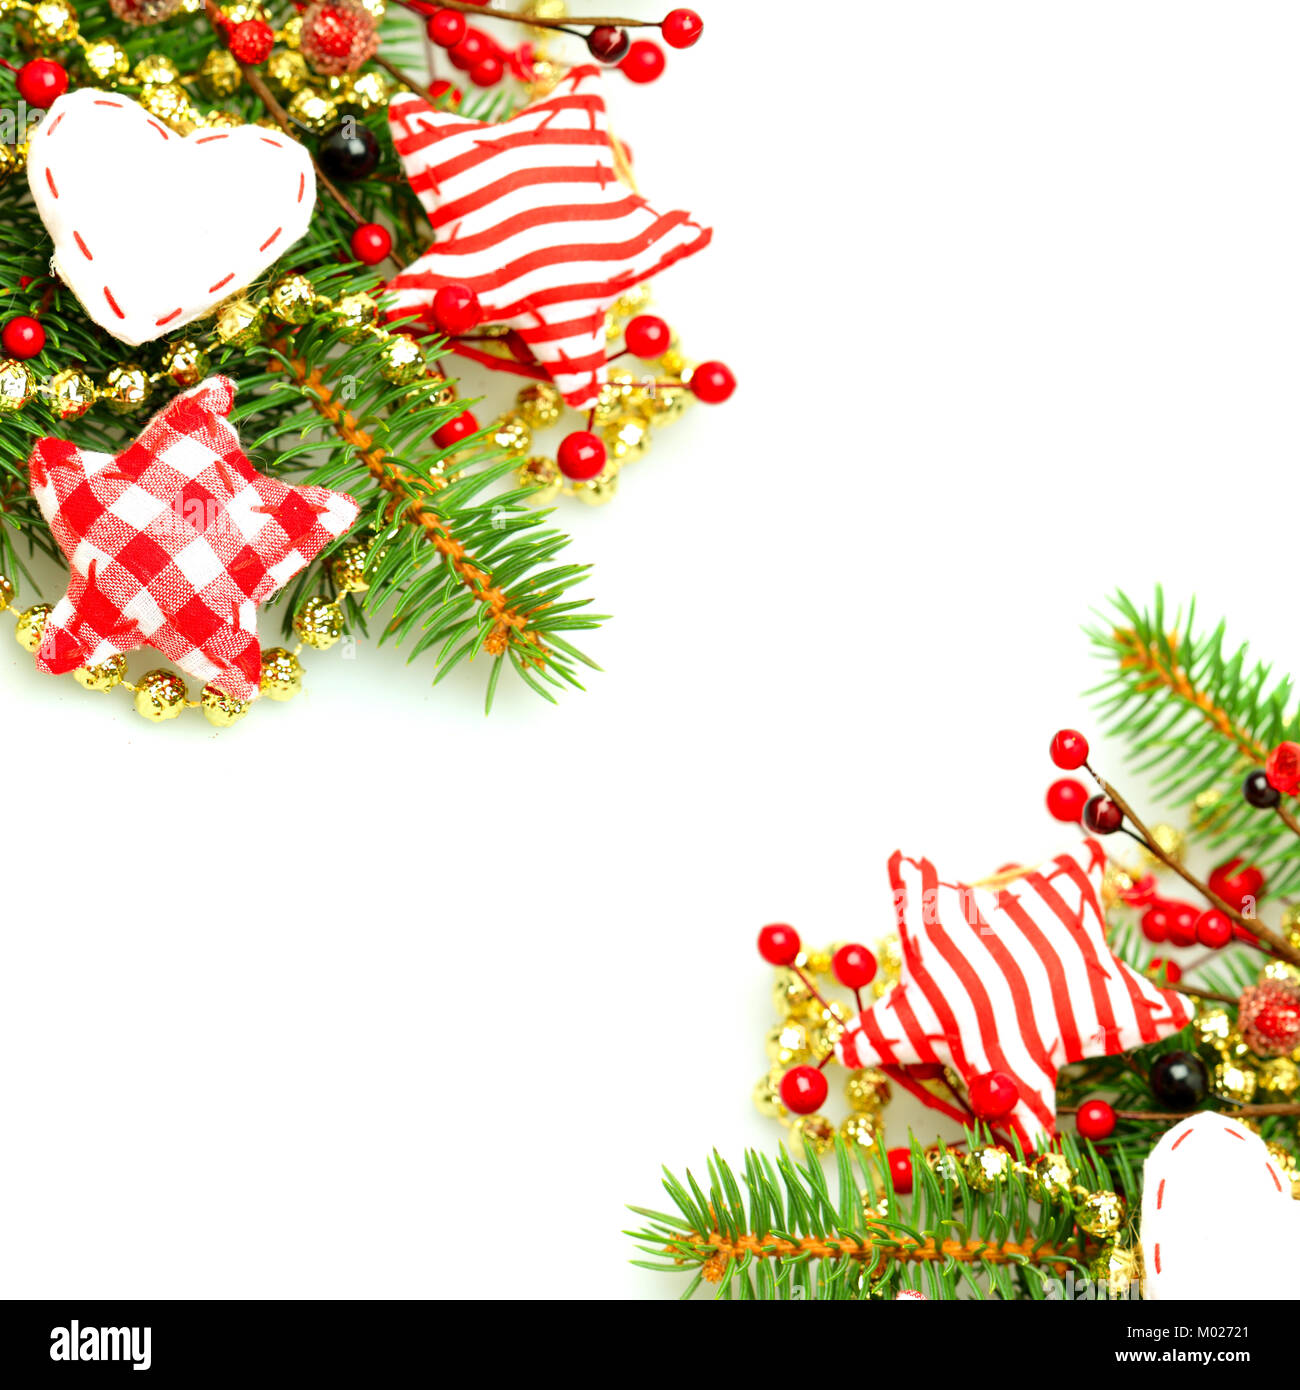 Christmas border with evergreen green fir twig and handmade decorations on background Stock Photo